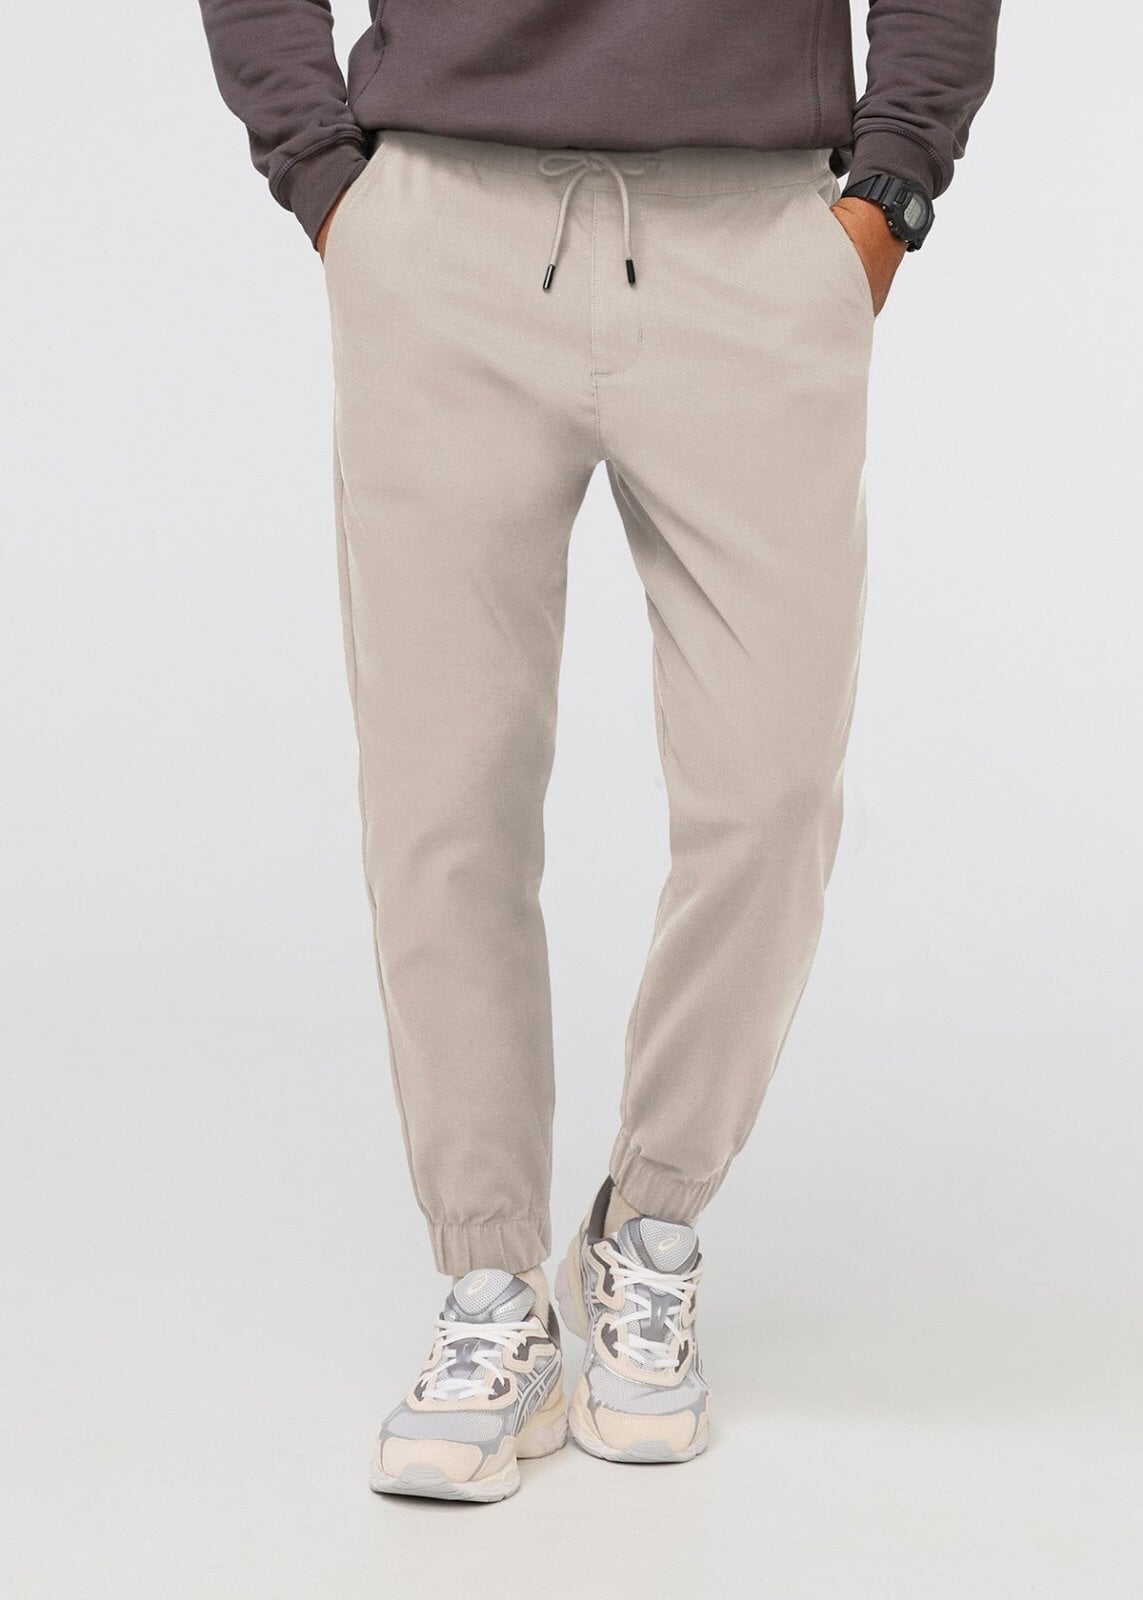 Men's Relaxed Fit Pants & Jeans - DUER – Tagged filter-group-color_khaki